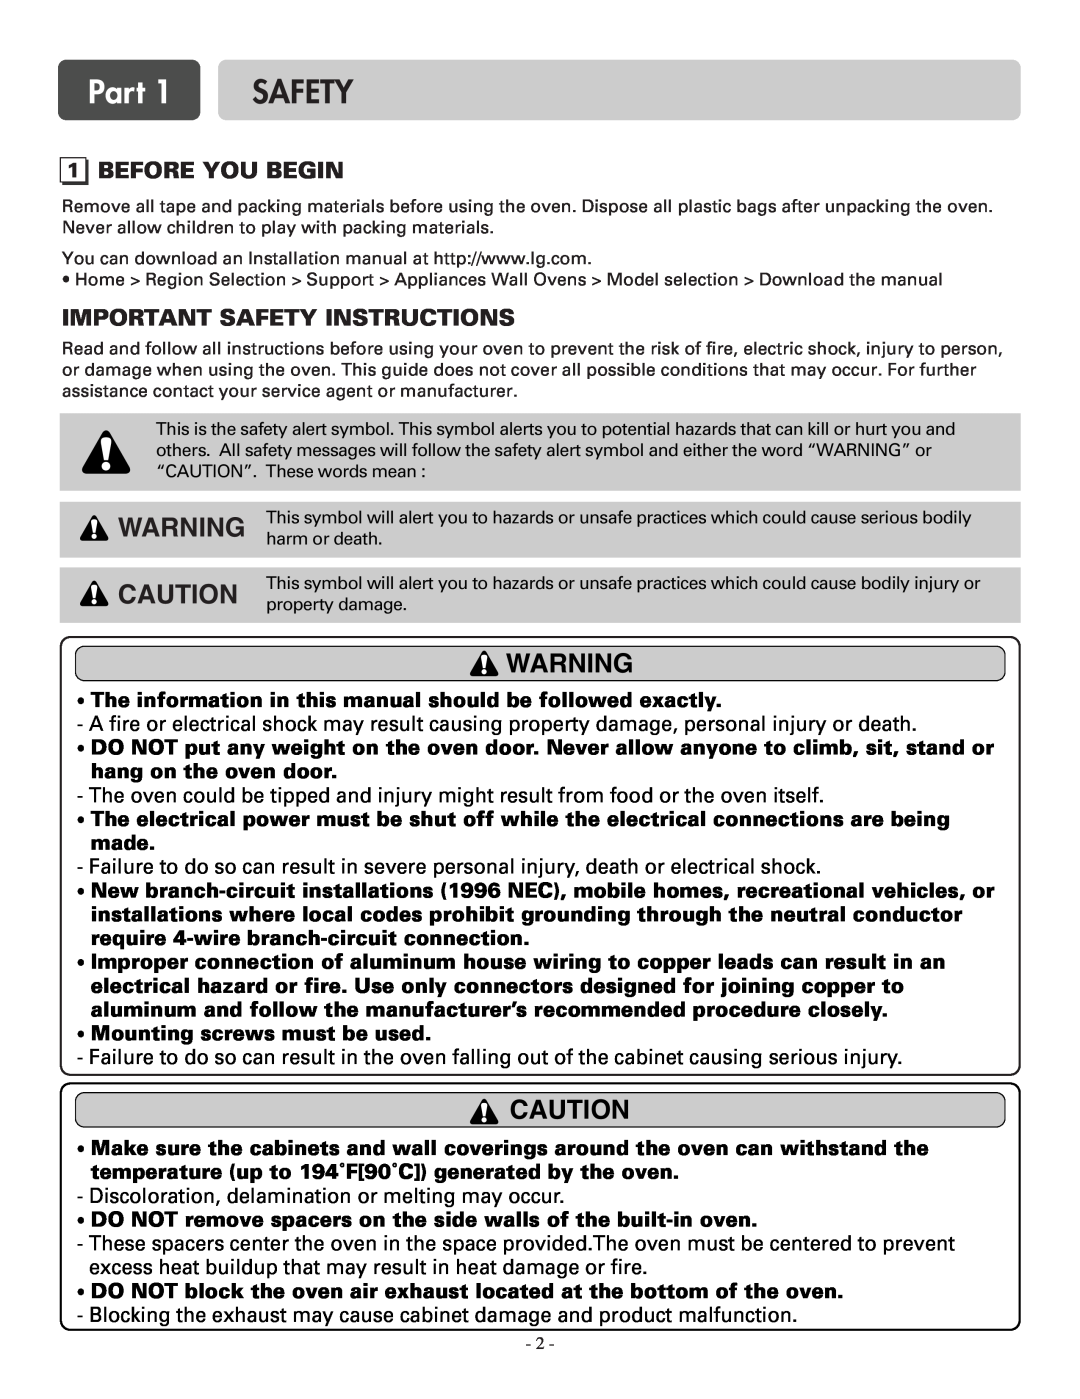 LG Electronics LSWS305ST, LSWD305ST installation manual Part, Before You Begin, Important Safety Instructions 